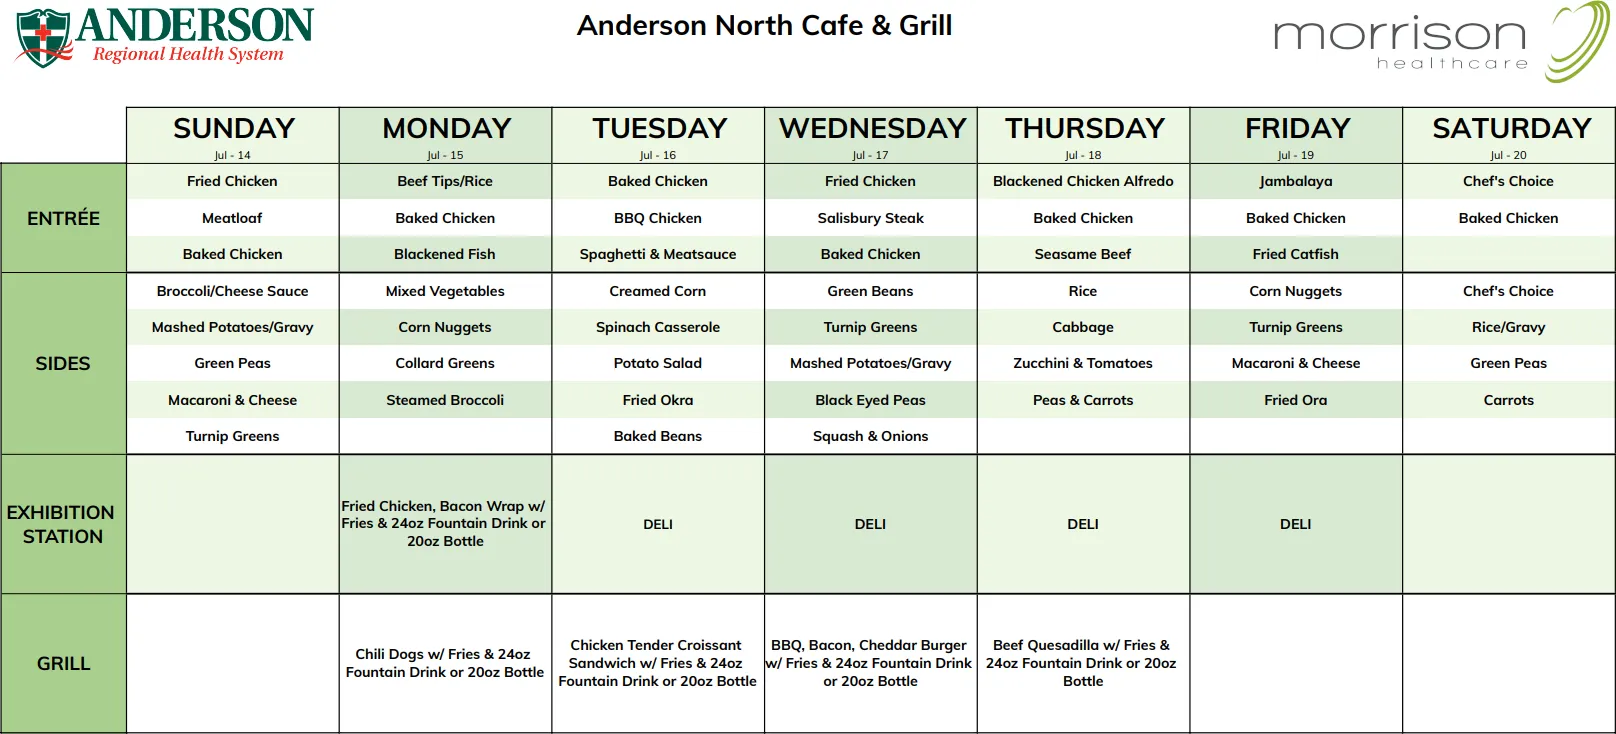 Weekly menu chart for Anderson North Cafe & Grill